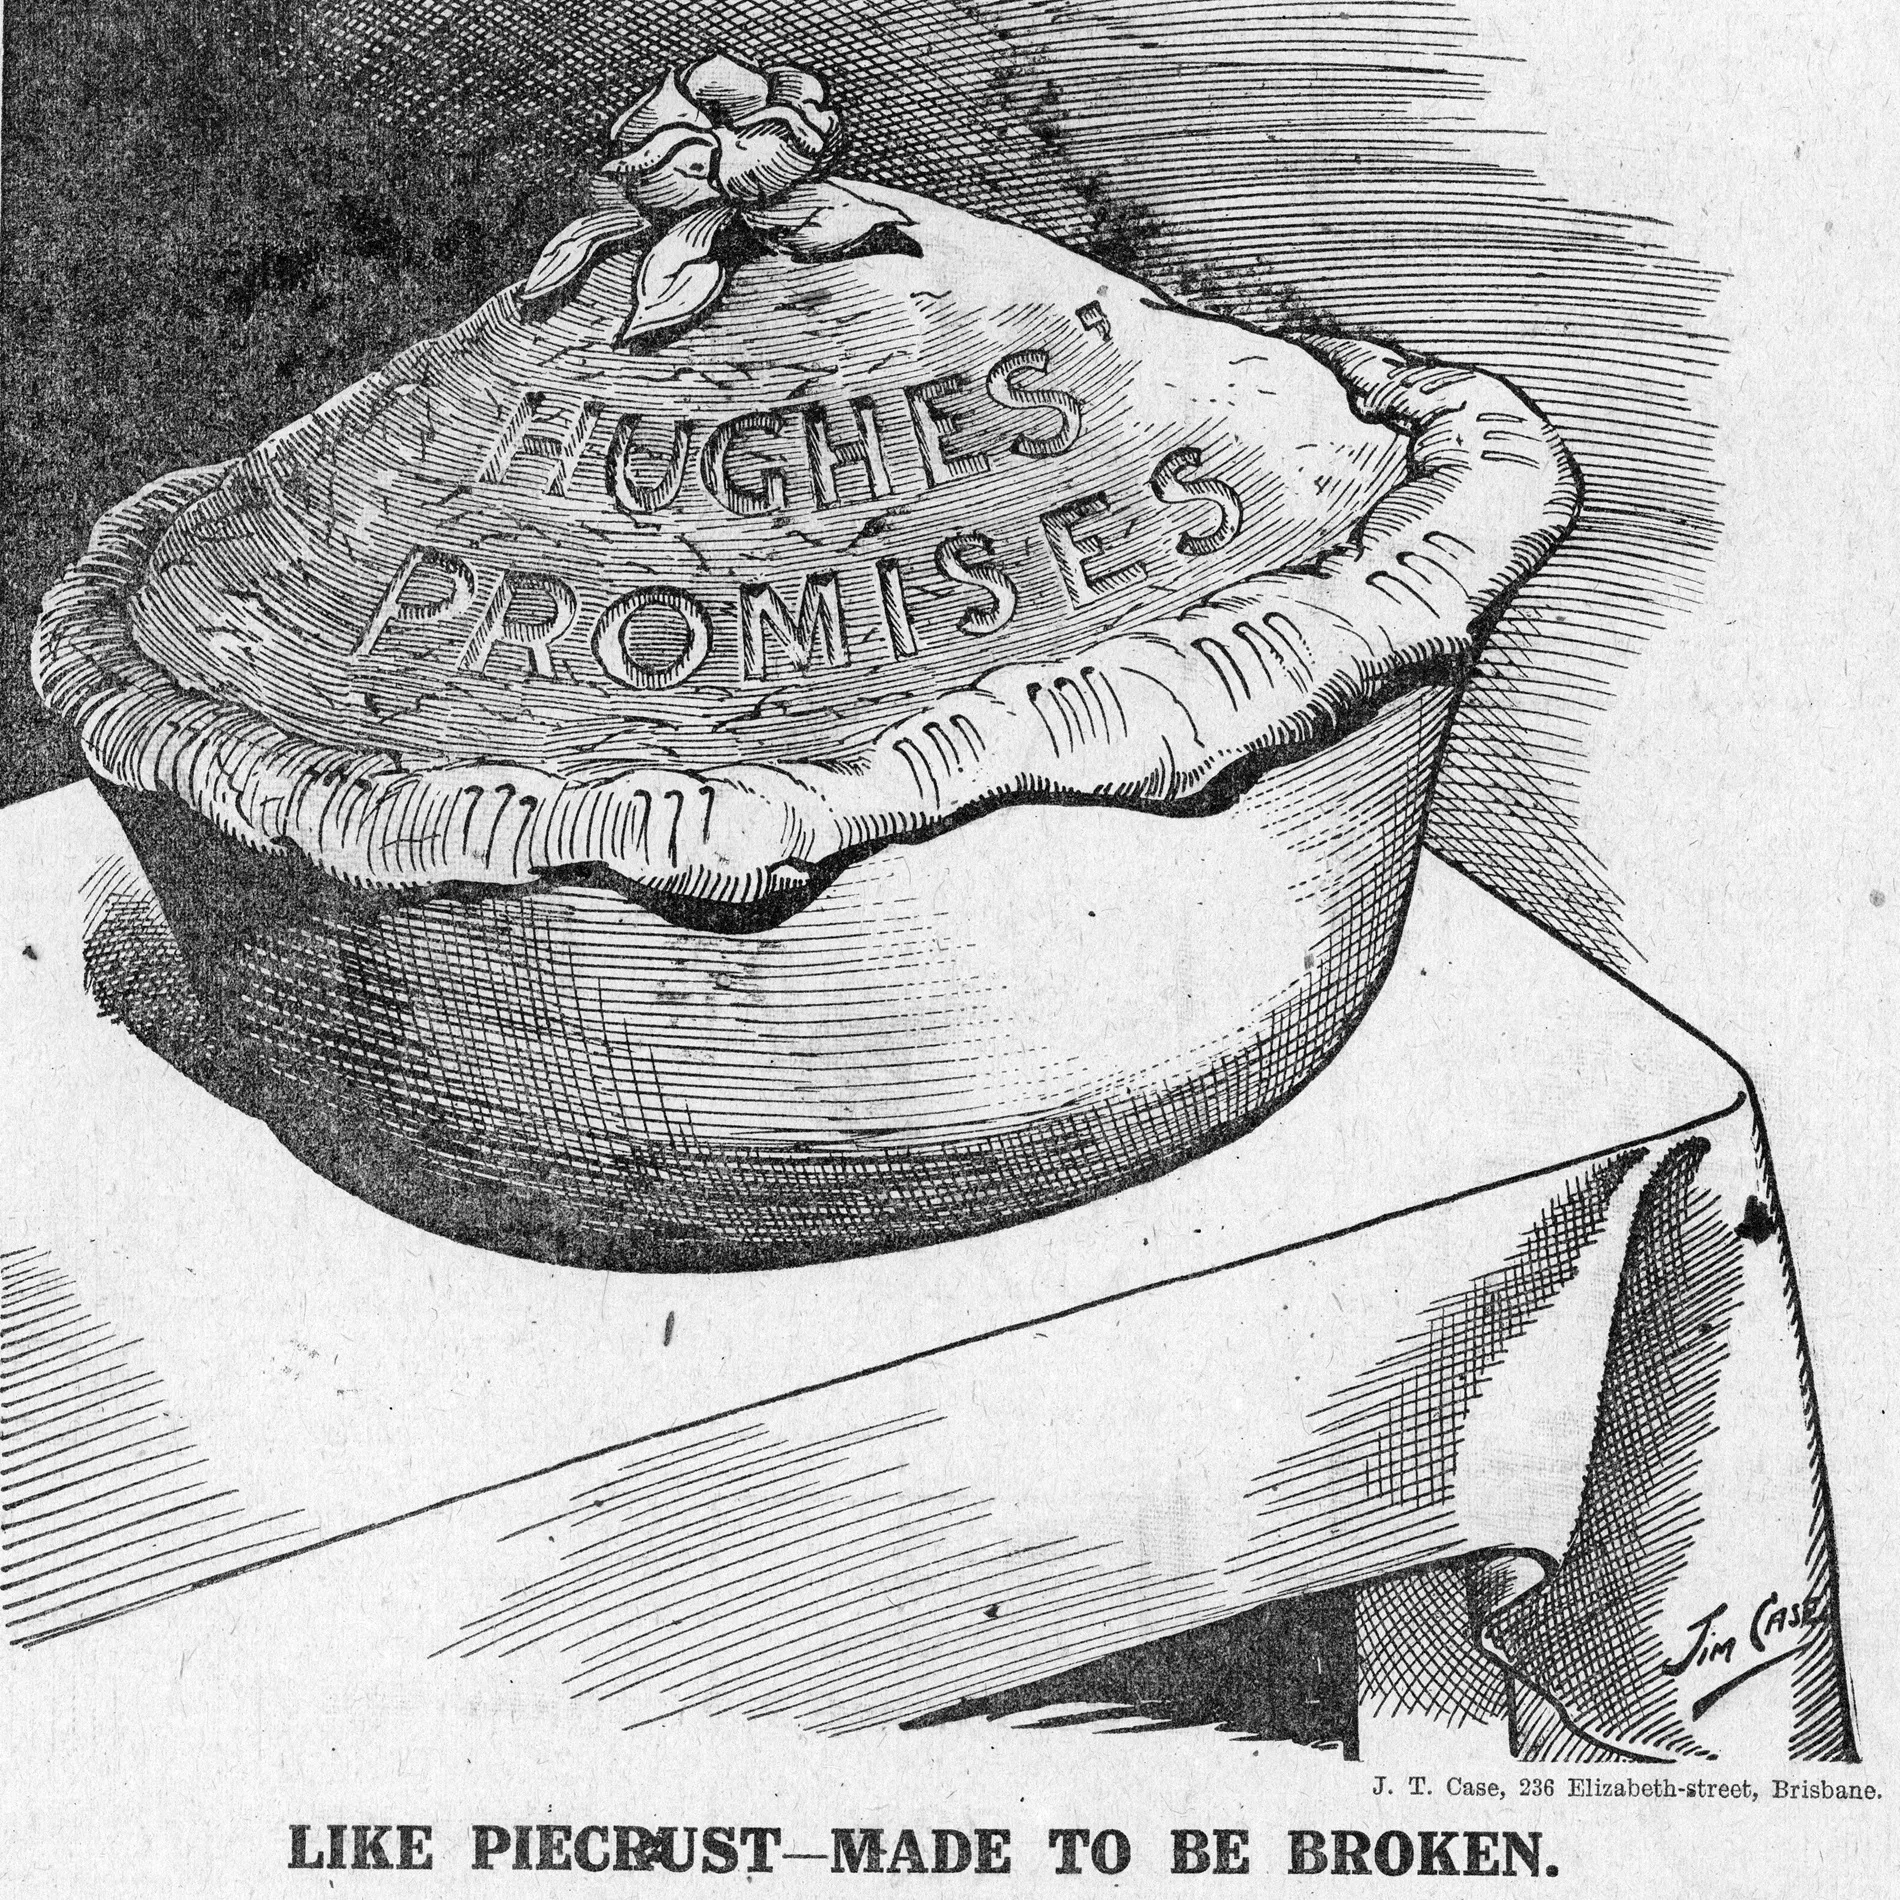 Sketch of a pie engraved with the words 'Hughes' Promises' and the caption 'Like piecrust - made to be broken'.